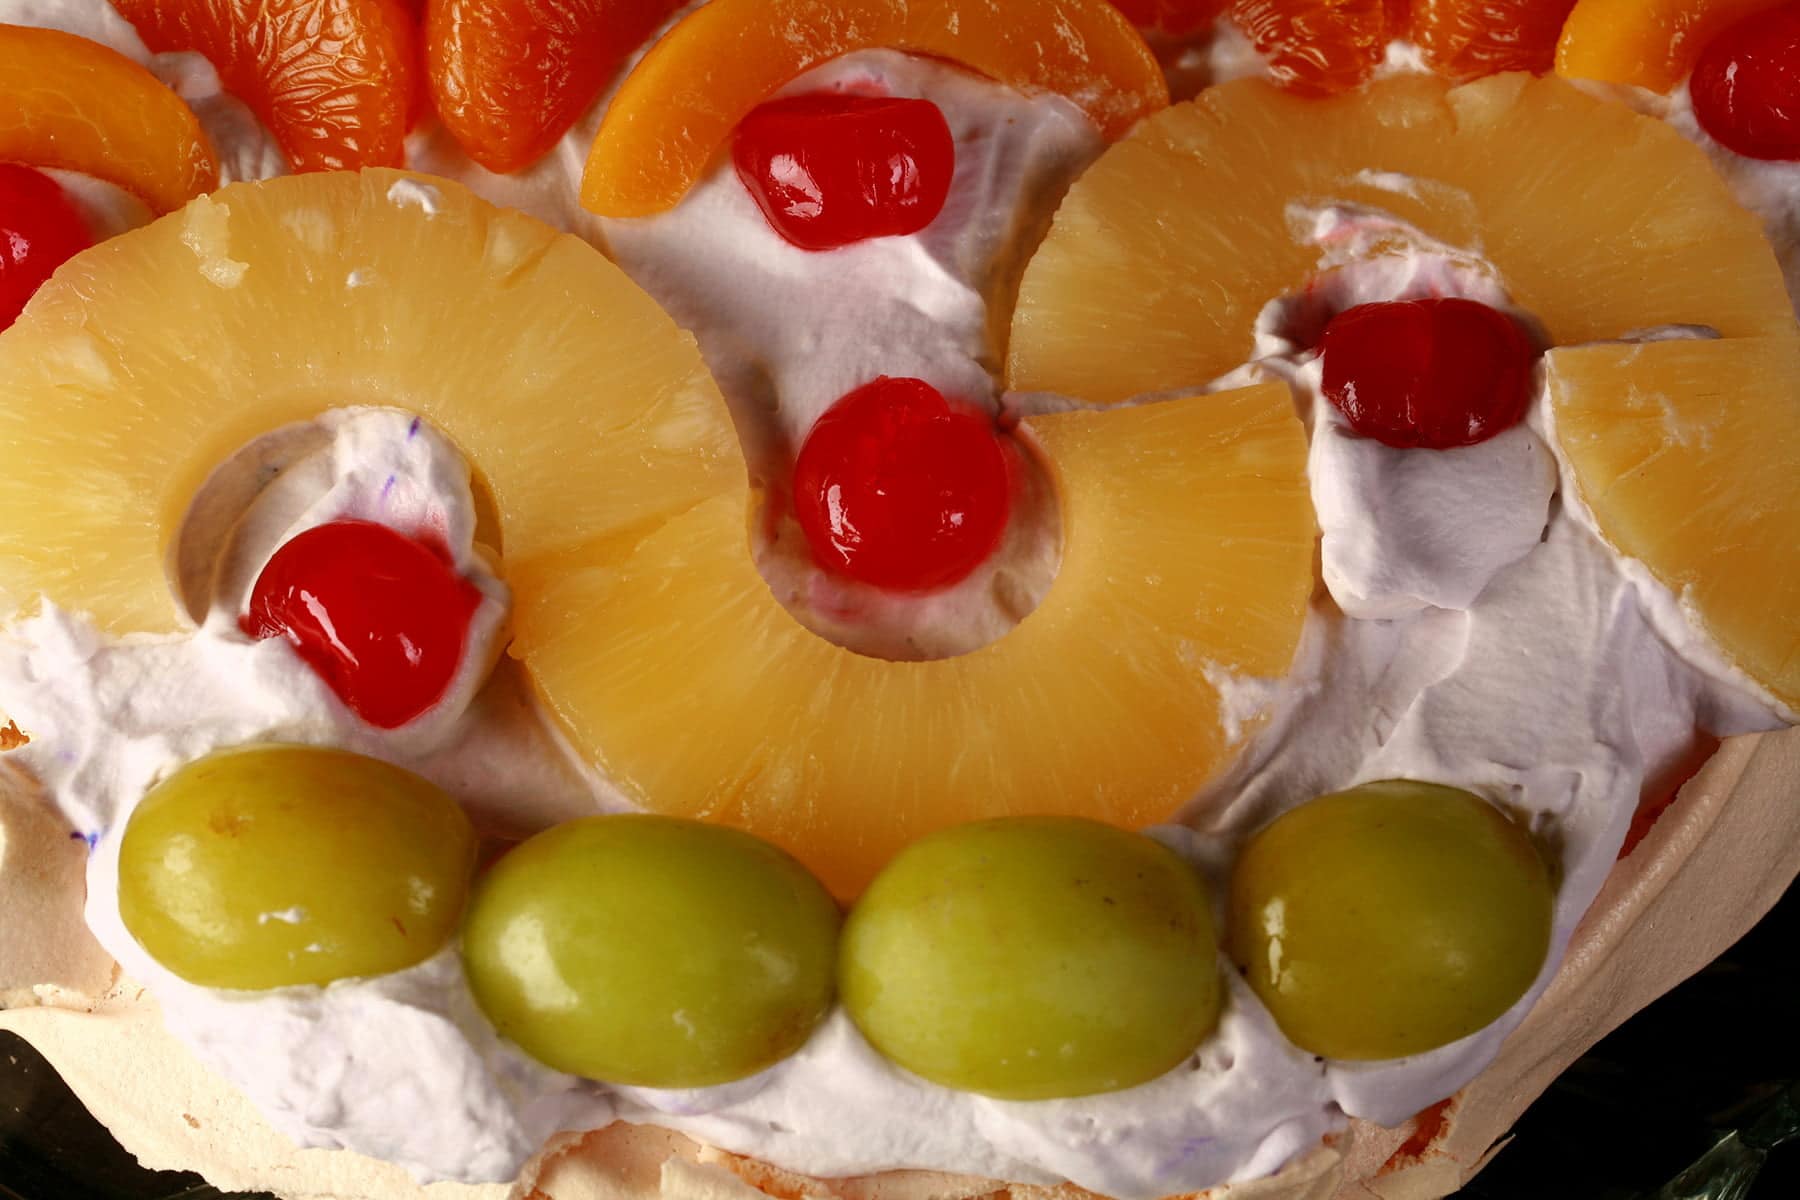 A close up view of an Easter pavlova.